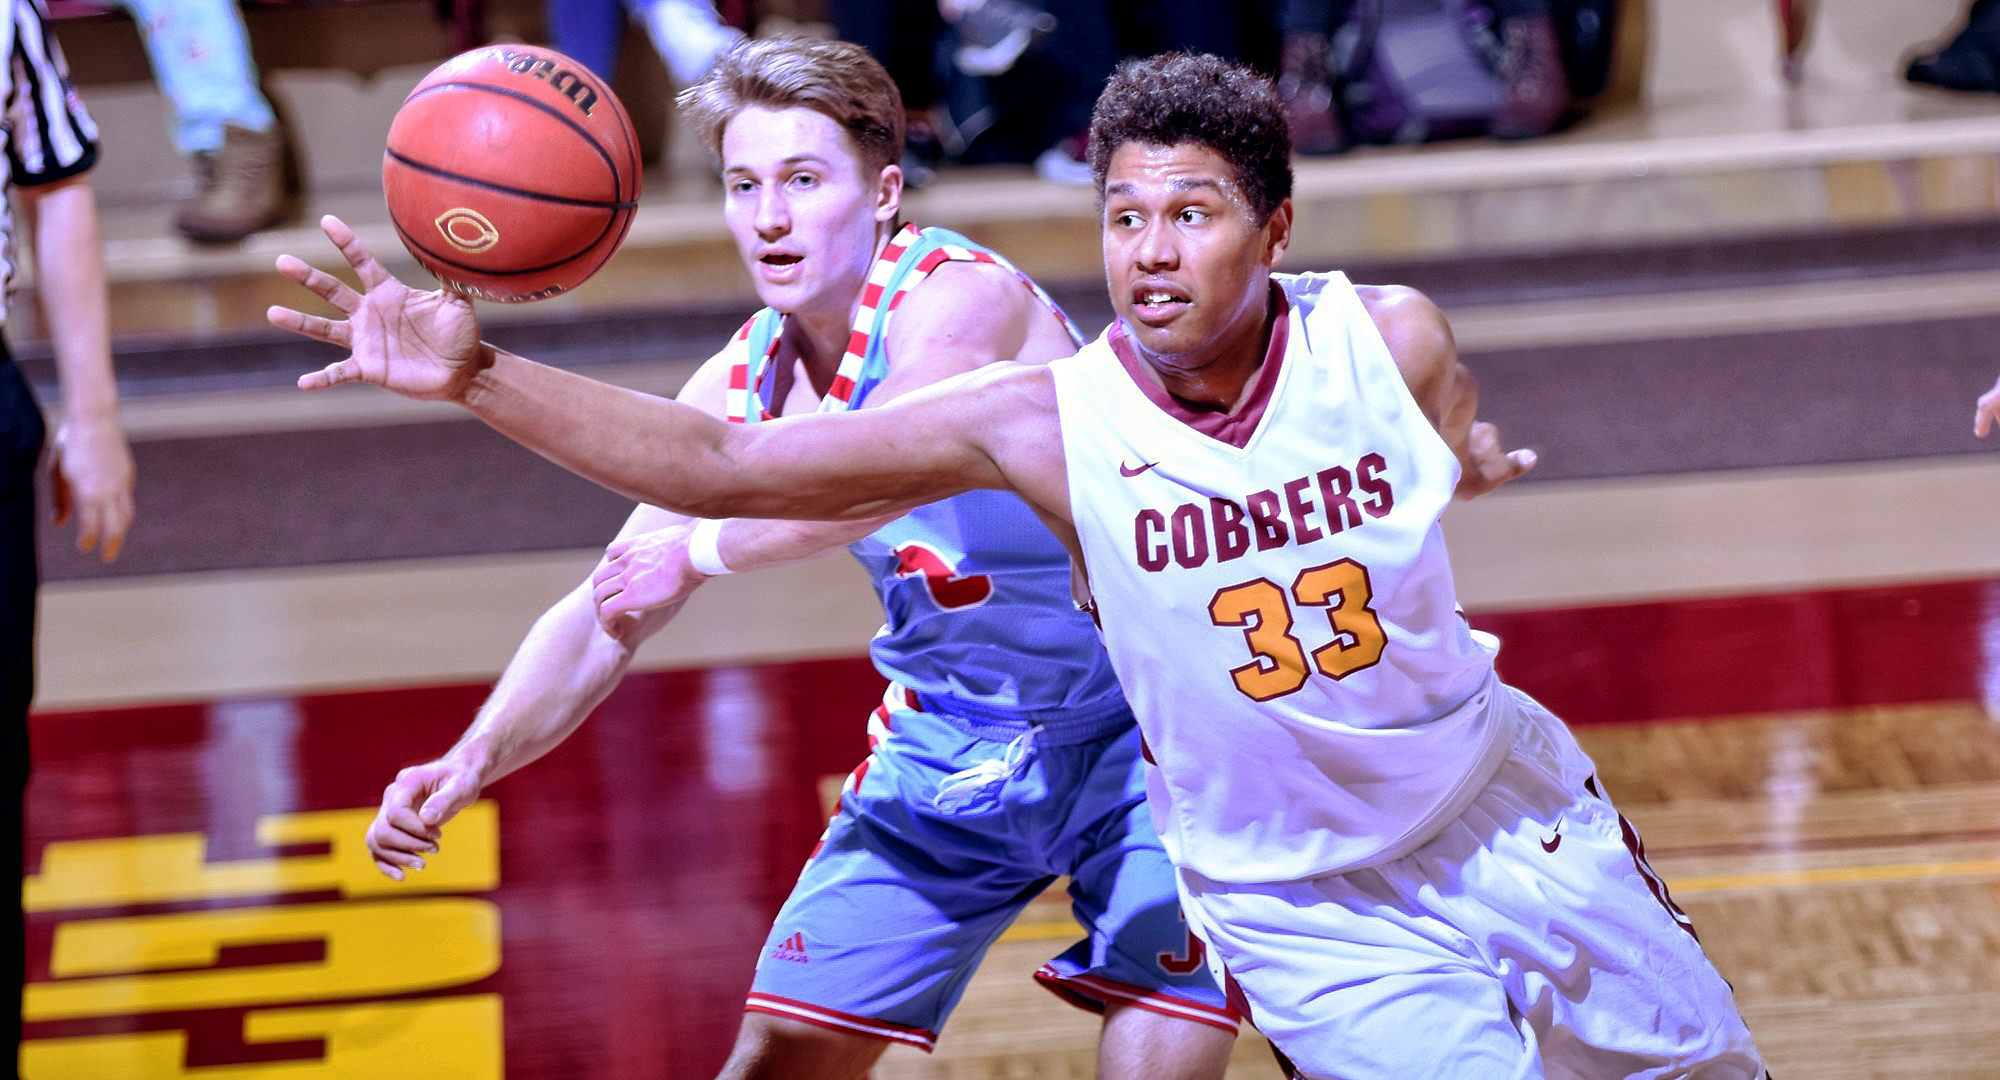 Ty Setness had five points and four rebounds in the Cobbers' game at #12 St. John's.